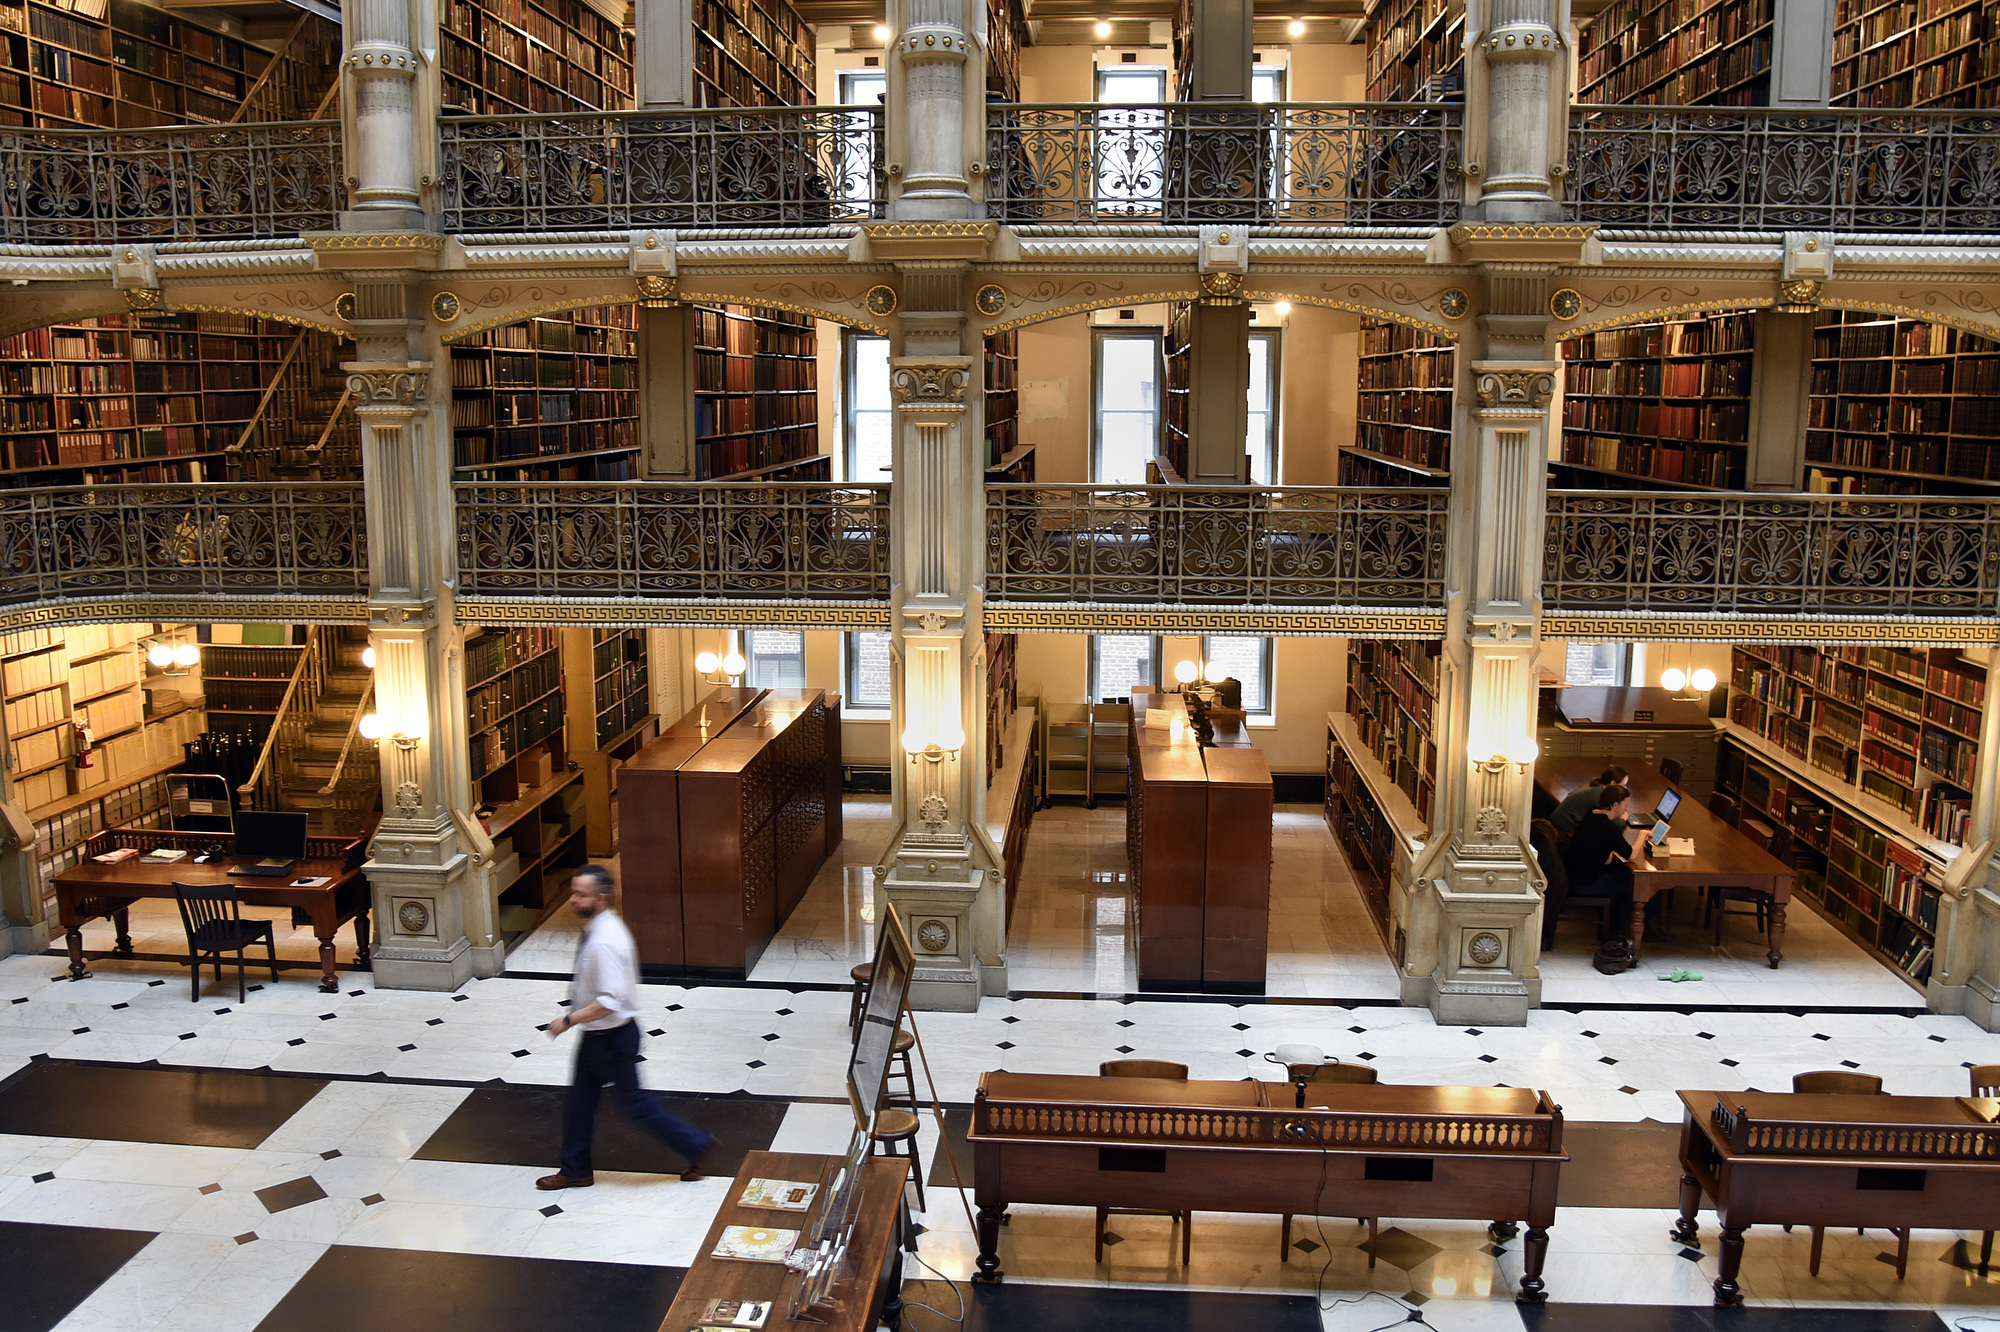 The Peabody Library, a literary and architectural